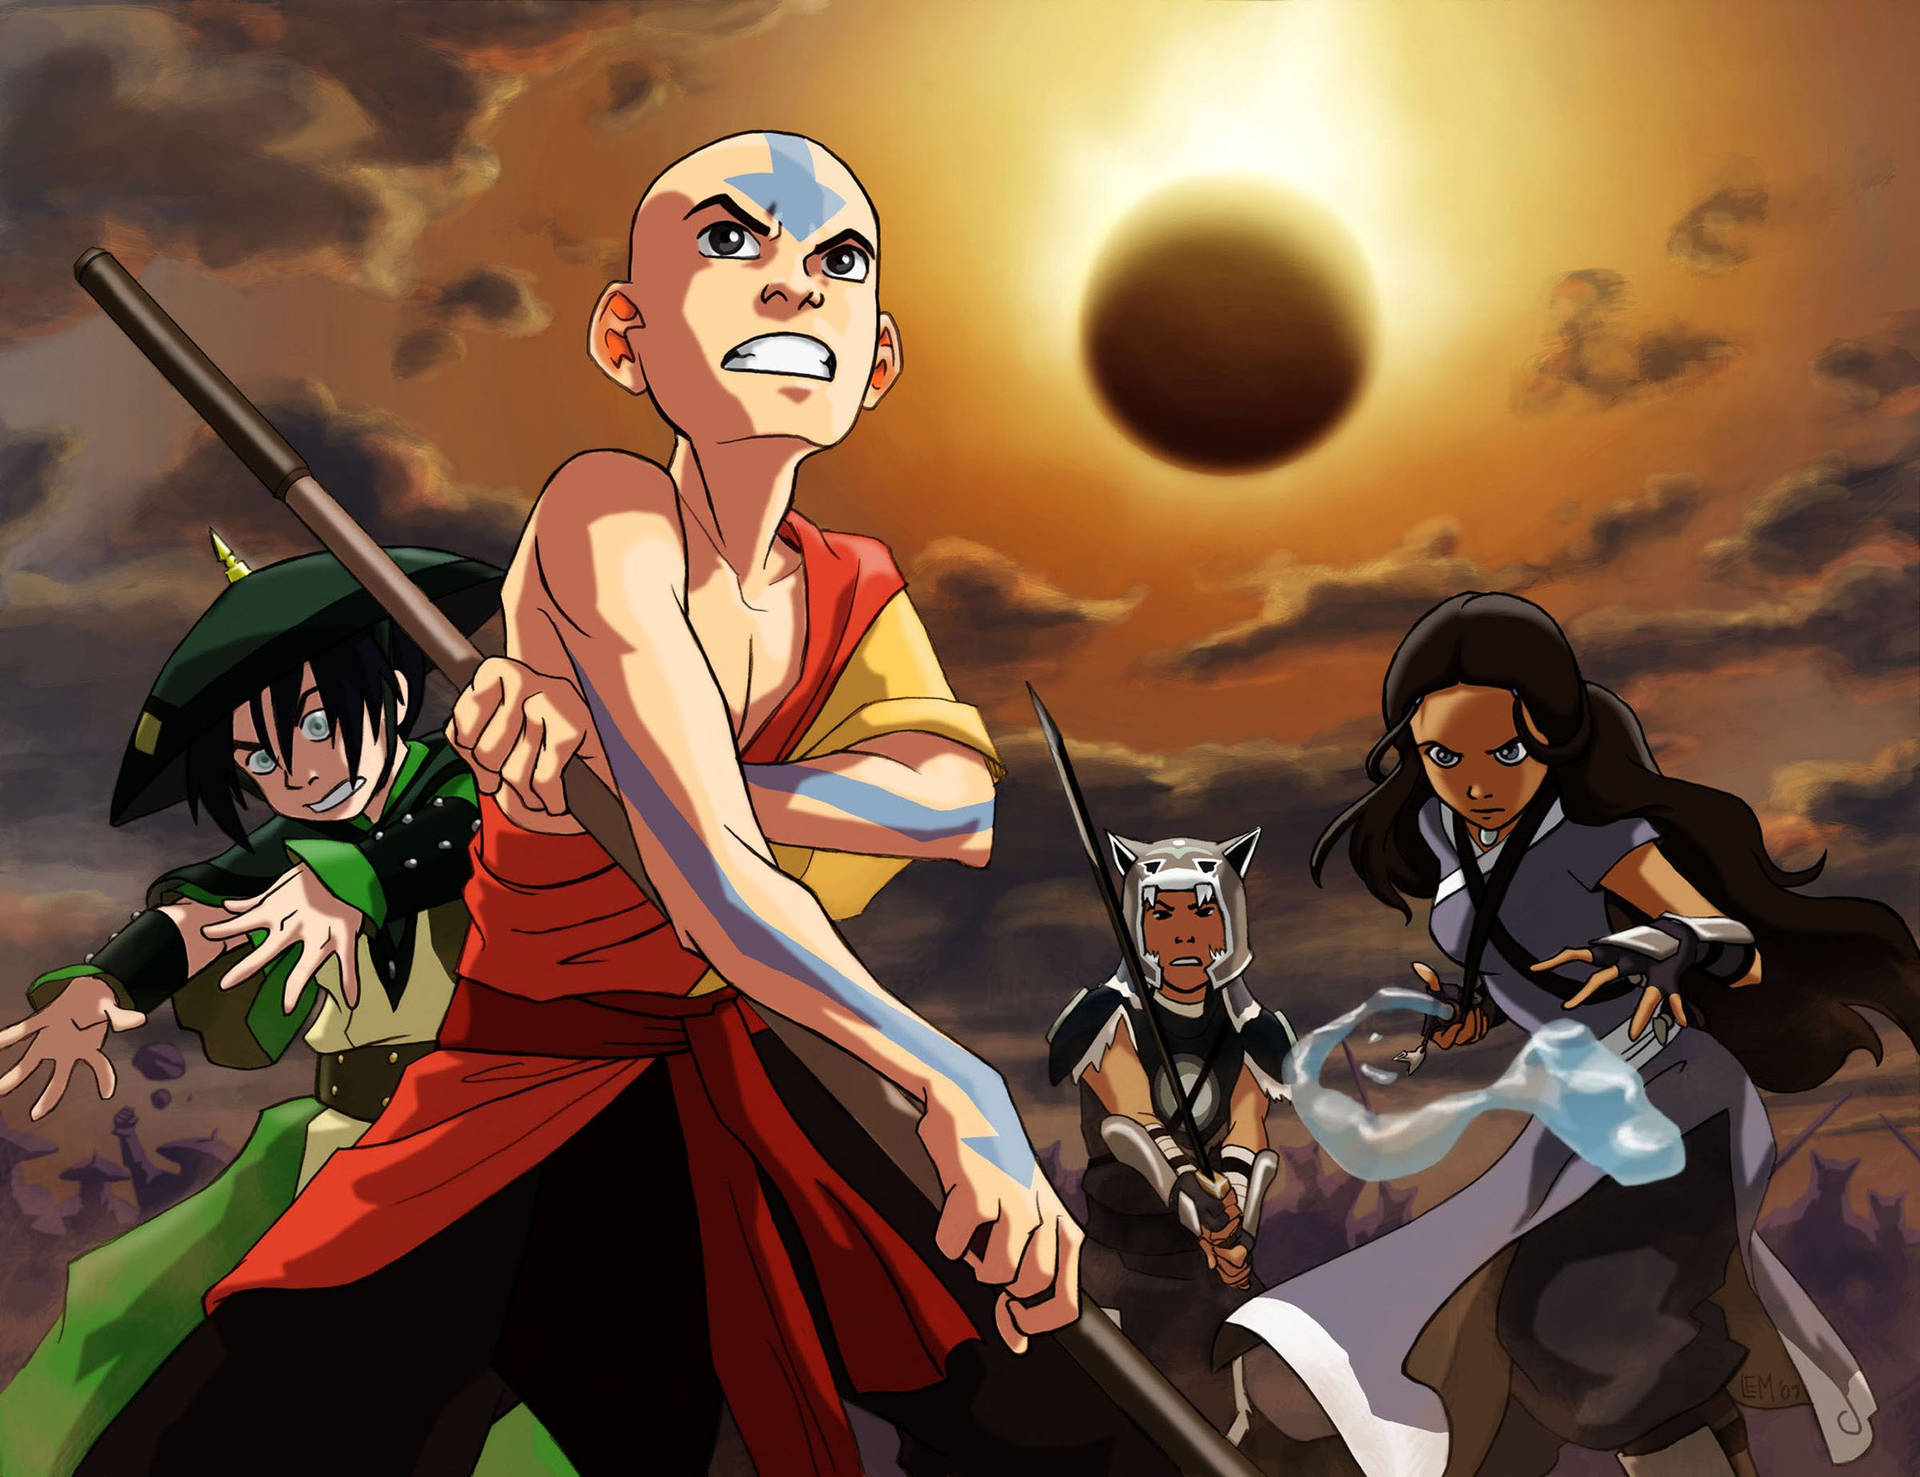 Aang crosses paths with Fire Lord Sozin during the fourth and final book in Avatar: The Last Airbender. Wallpaper